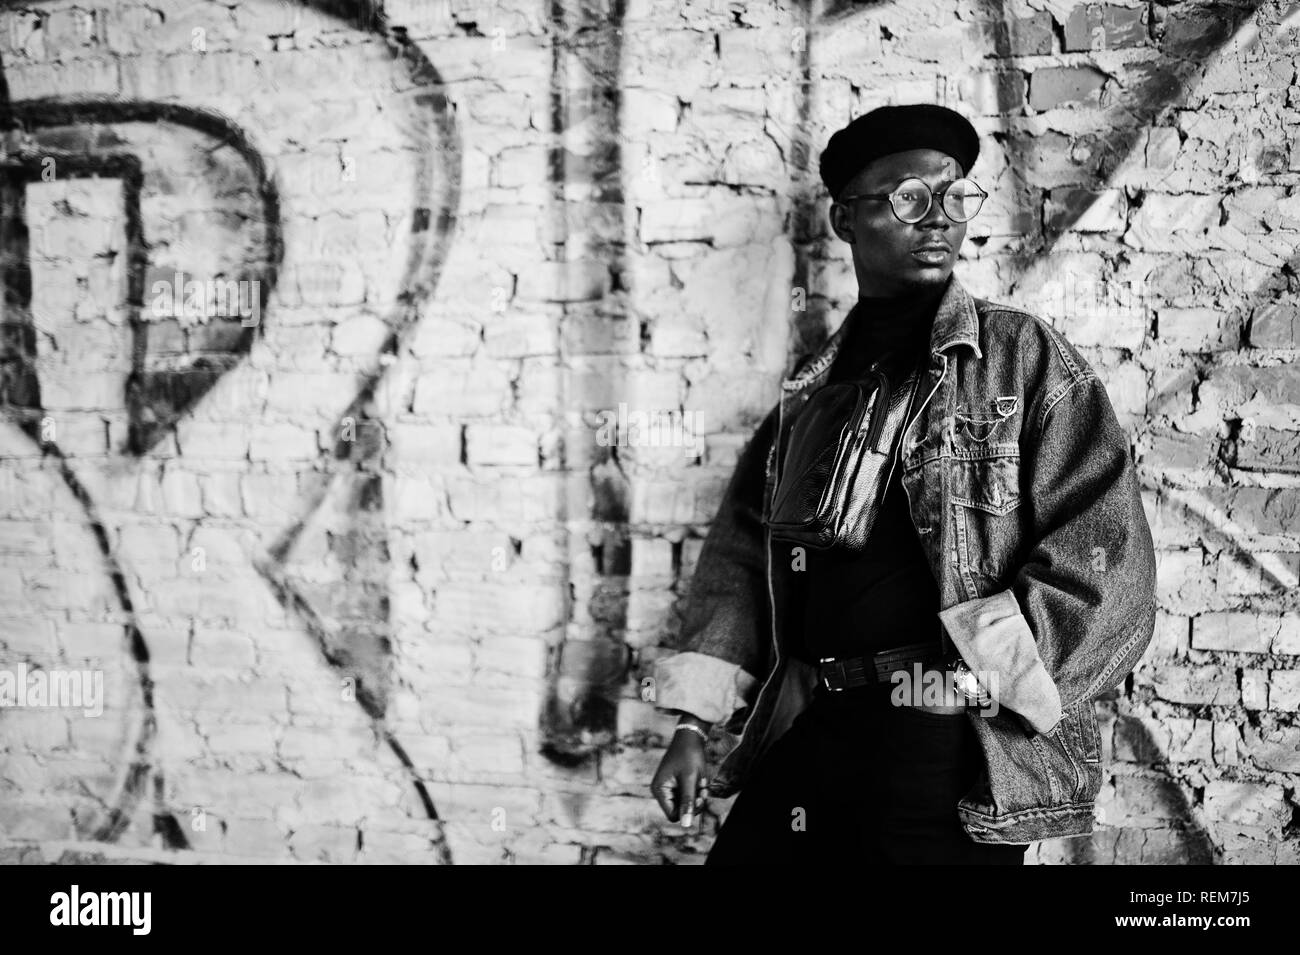 African american man in jeans jacket, beret and eyeglasses against graffiti brick wall with bruk sign. Stock Photo